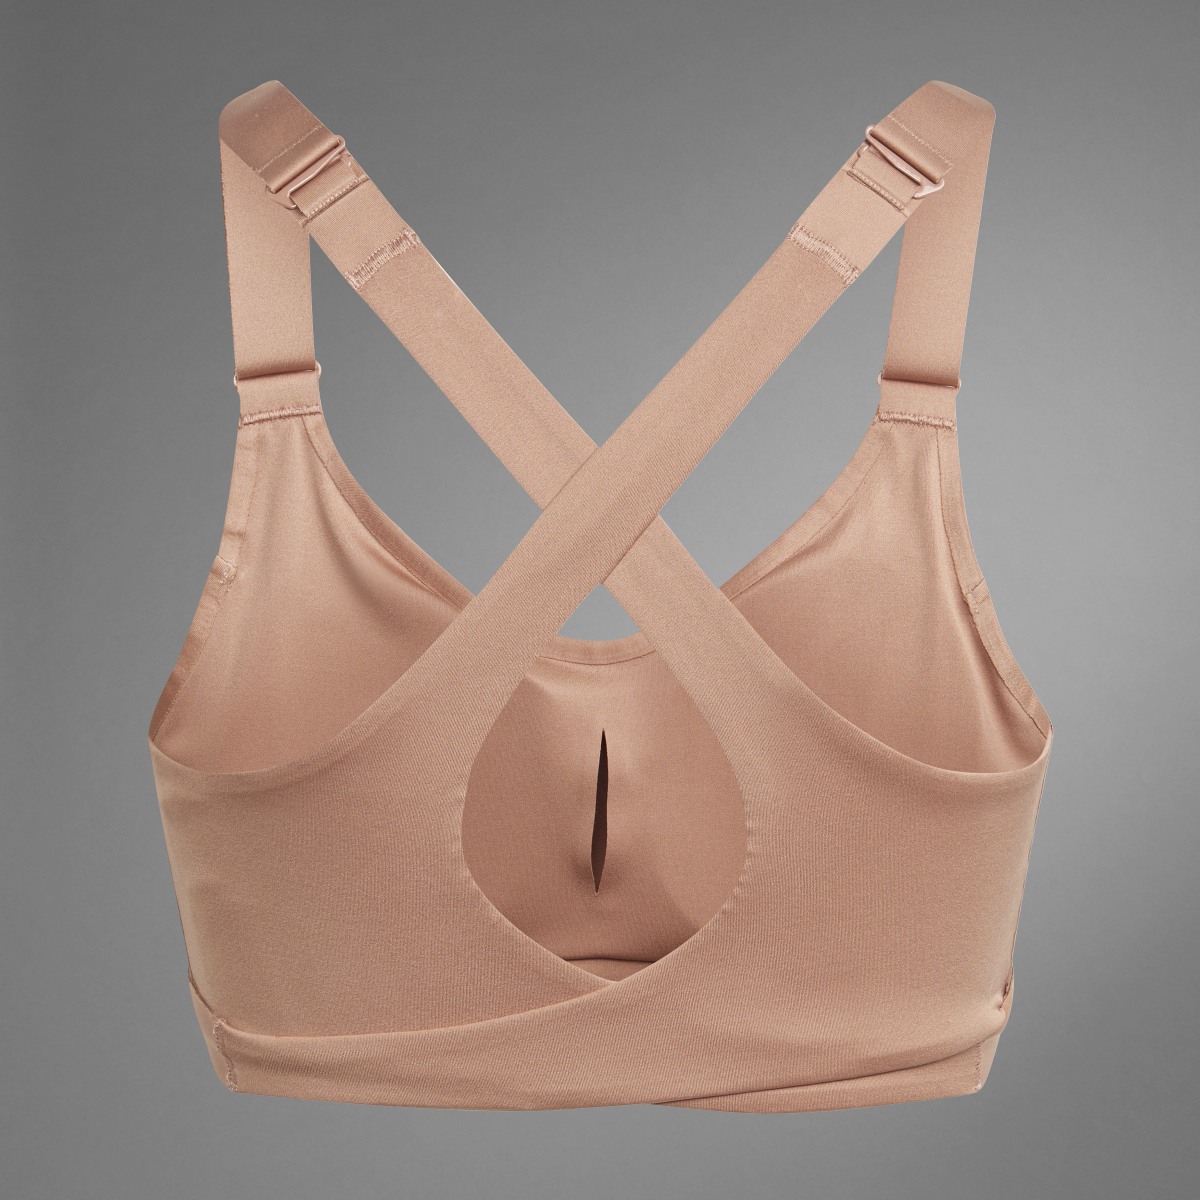 Adidas Brassière Collective Power Fastimpact Luxe Maintien fort. 11